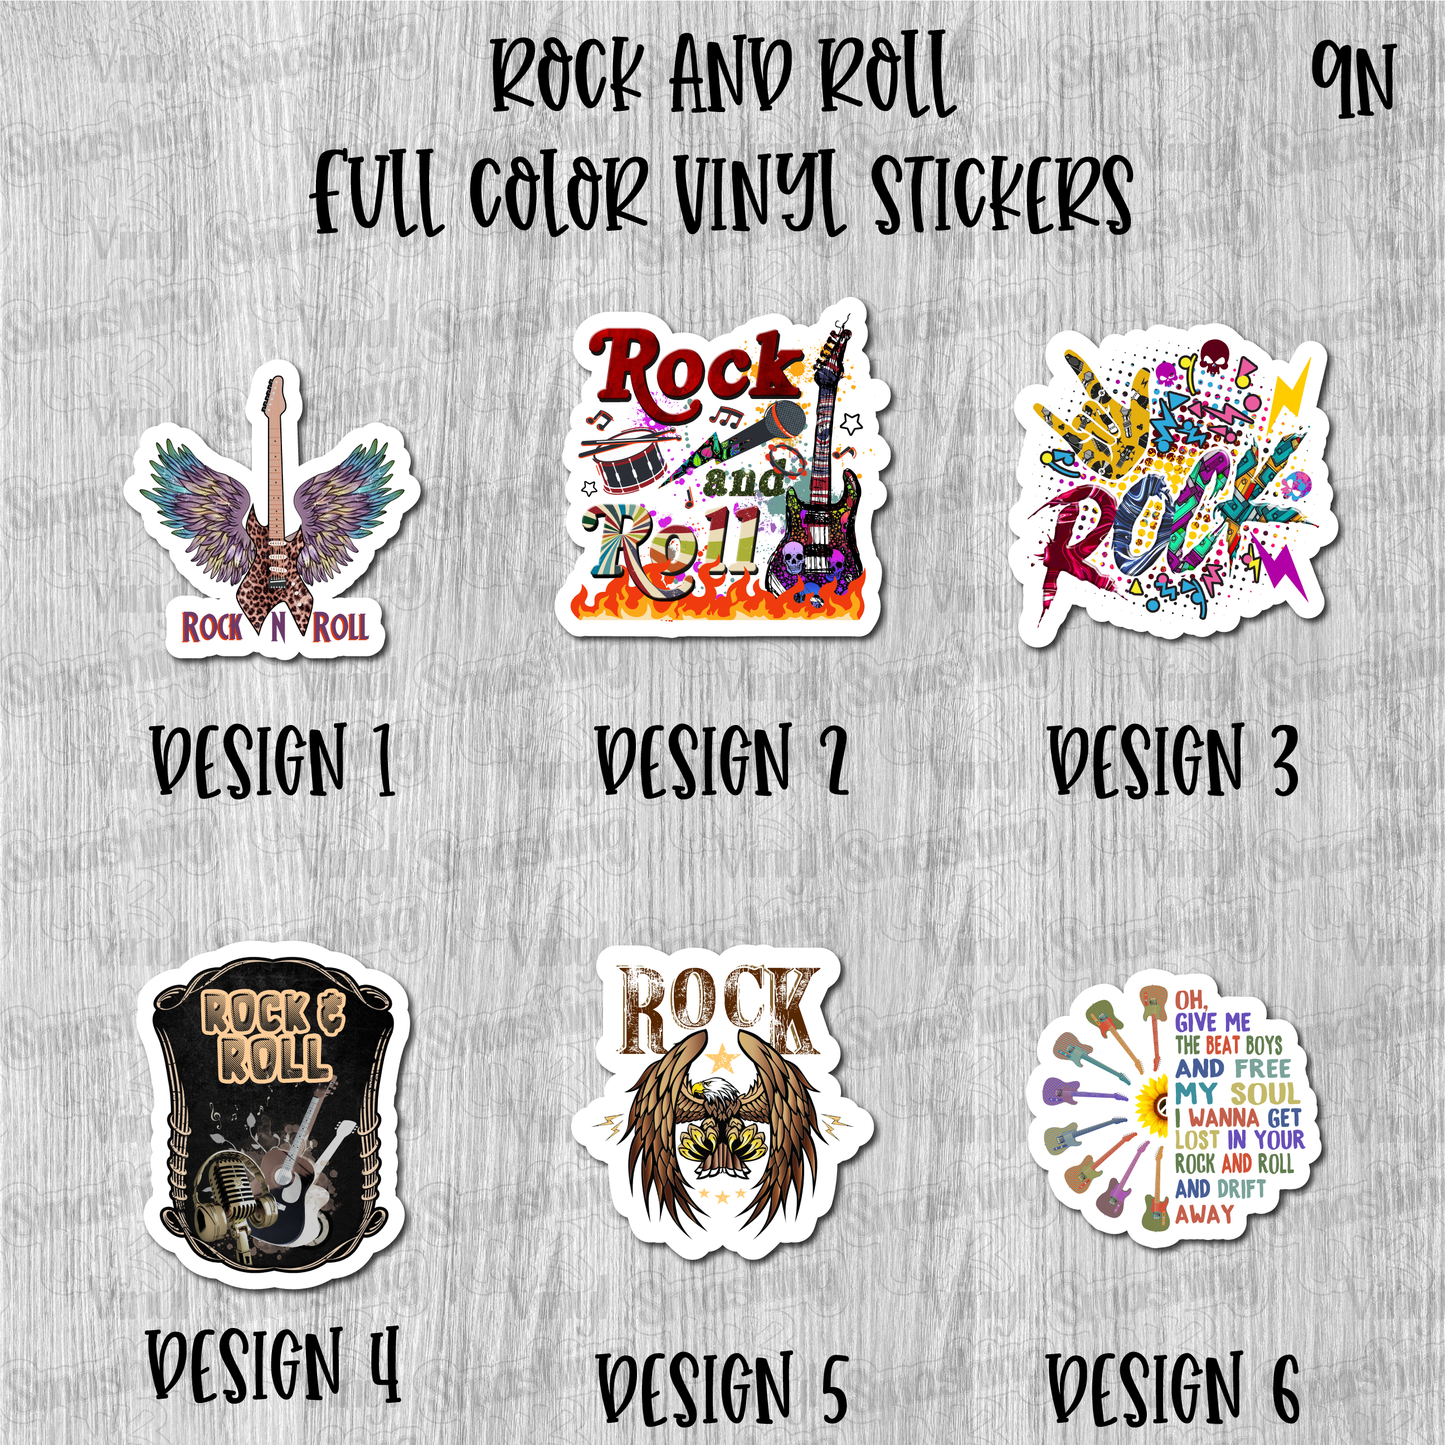 Rock And Roll - Full Color Vinyl Stickers (SHIPS IN 3-7 BUS DAYS)